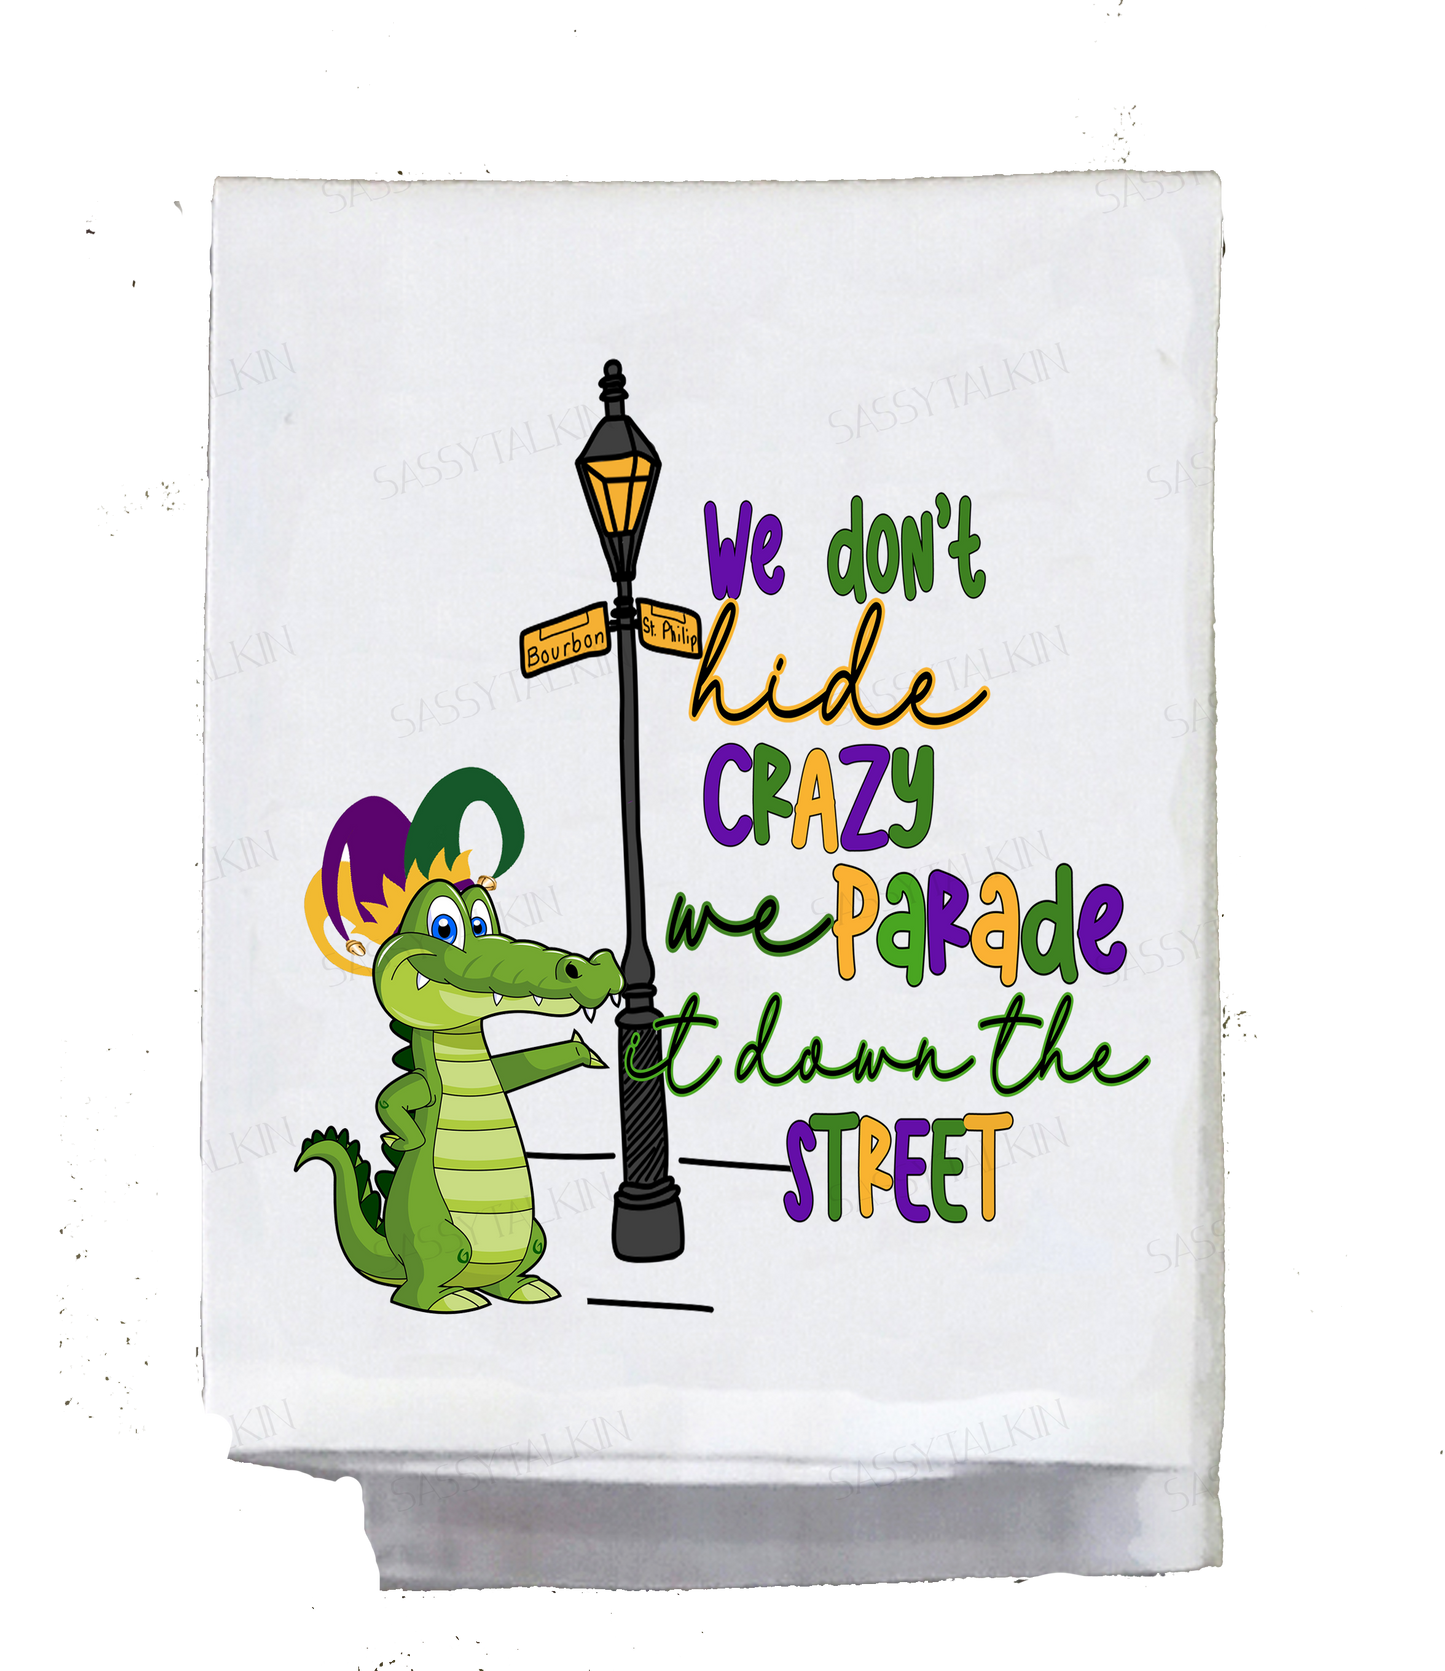 Mardi Gras, Dish Towel, In this family we don't hide crazy